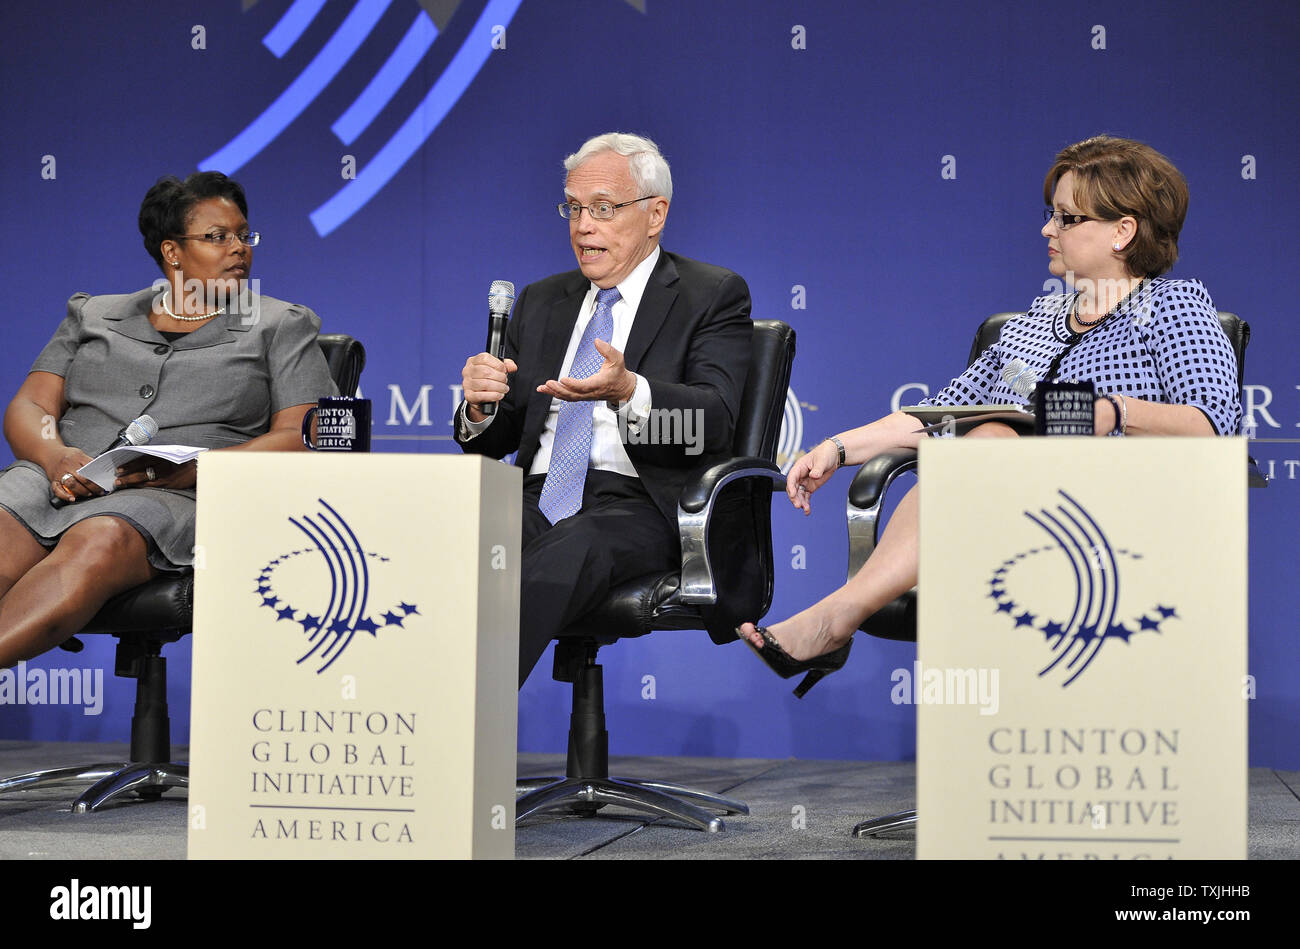 Nobel prize-winning, University of Chicago Economics professor James Heckman (C) speaks as D.C. Public Schools Chancellor Kaya Henderson (L) and Dow Corning Corporation Chairman Stephanie Burns listens during a panel discussion on education in America at the CGI America meeting on June 29, 2011 in Chicago. More than 700 business, government and non-profit leaders are participating in the two-day meeting, which is the first Clinton Global Initiative event to focus exclusively on driving job creation and economic growth in the United States.     UPI/Brian Kersey Stock Photo